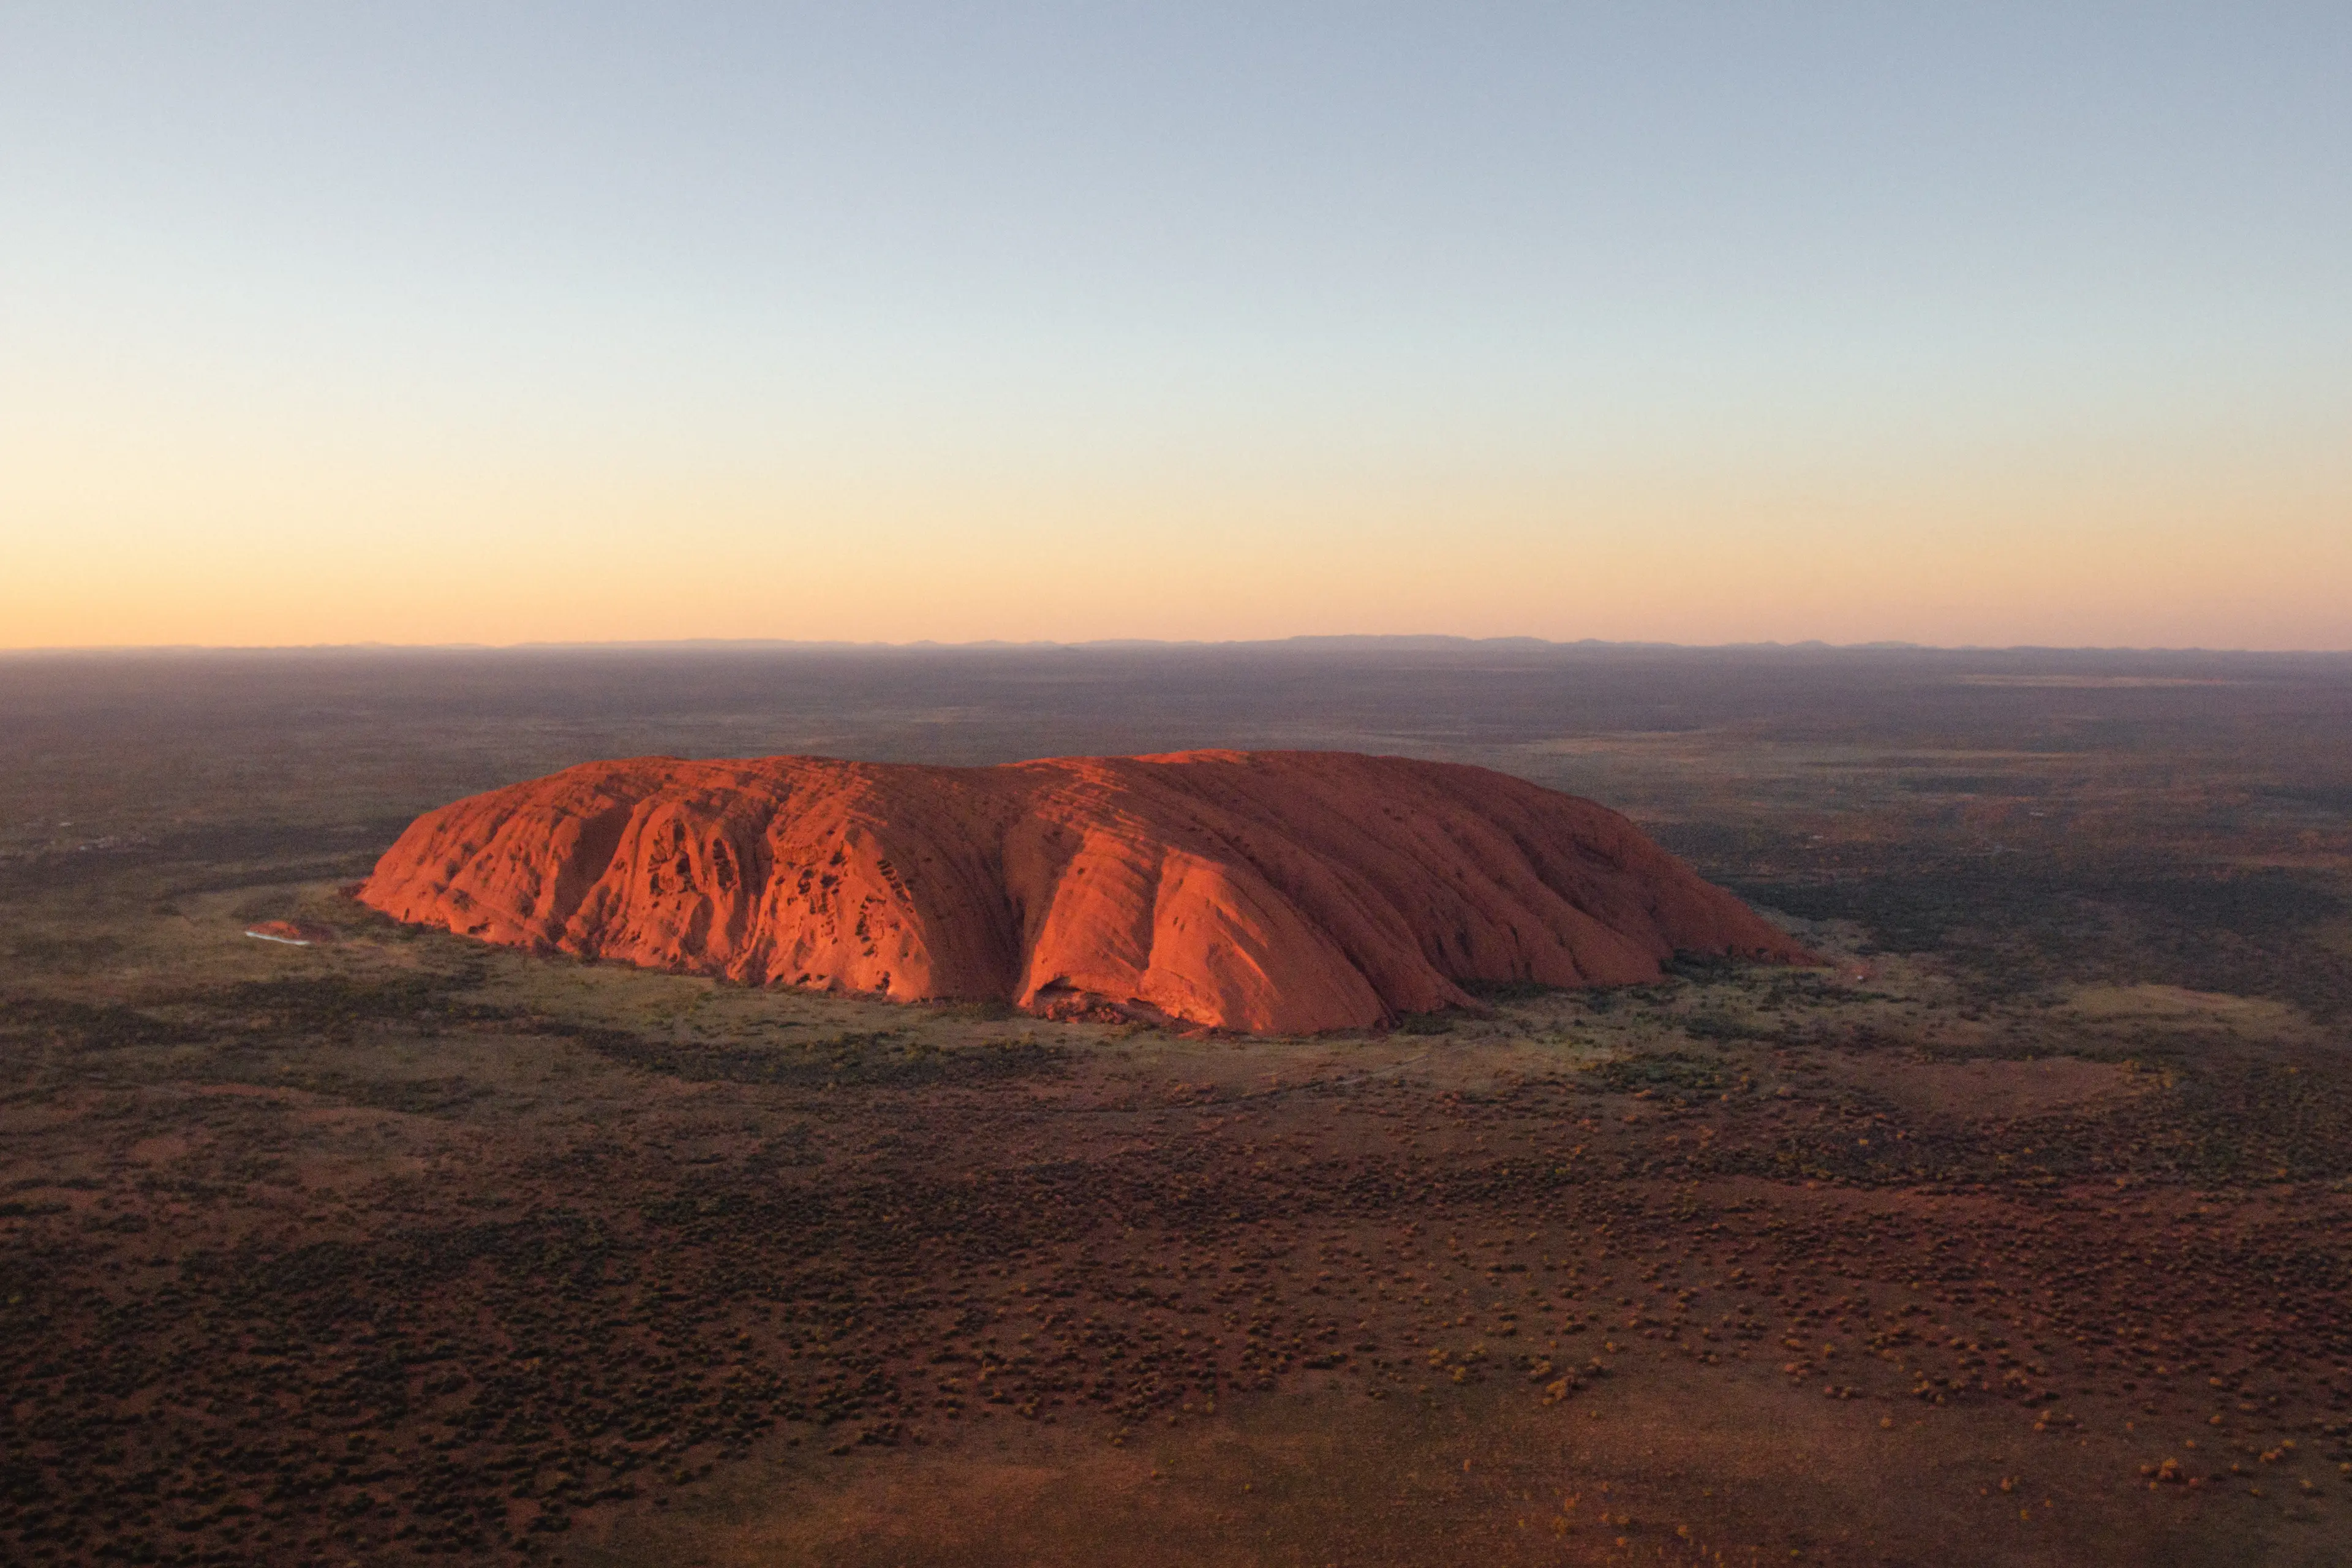 Panoramic view of the red colored Ayers Rock (Uluru) in the middle of the flat desert landscape of Uluru-Kata Tjuta National Park